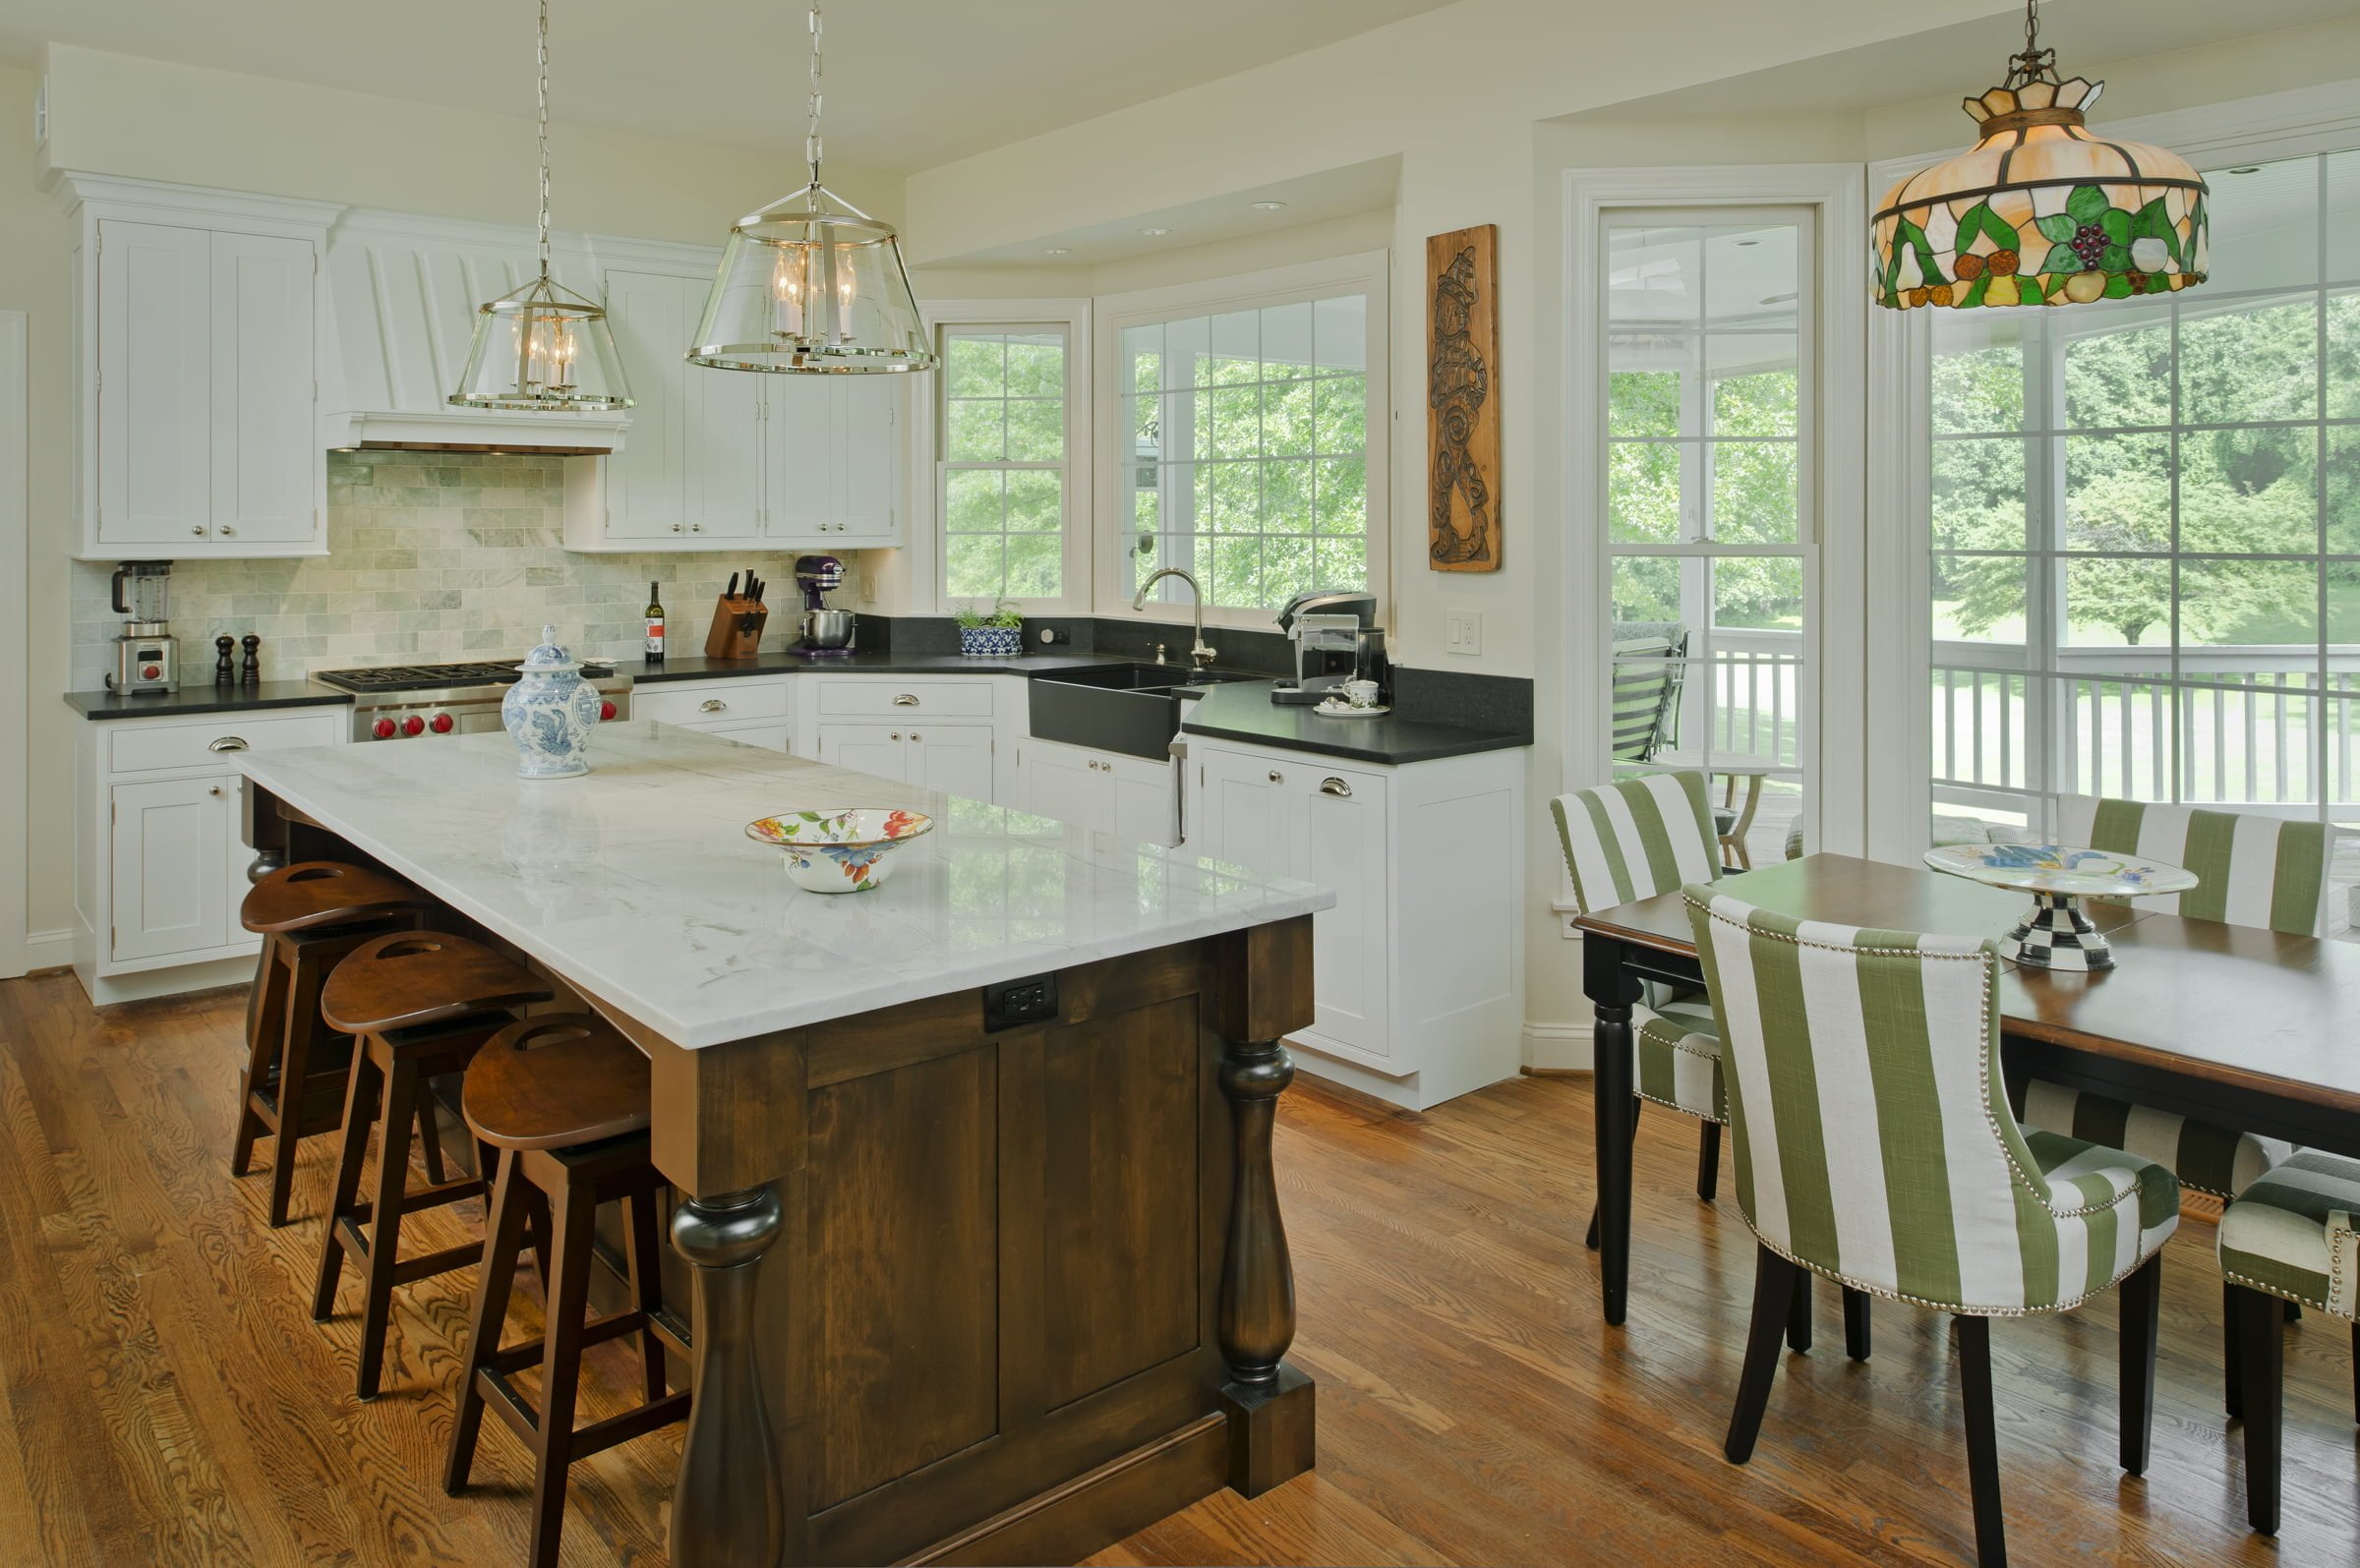 Transitional kitchen with medium hardwood flooring, white cabinetry, dark marble countertops and dark wooden island and stools